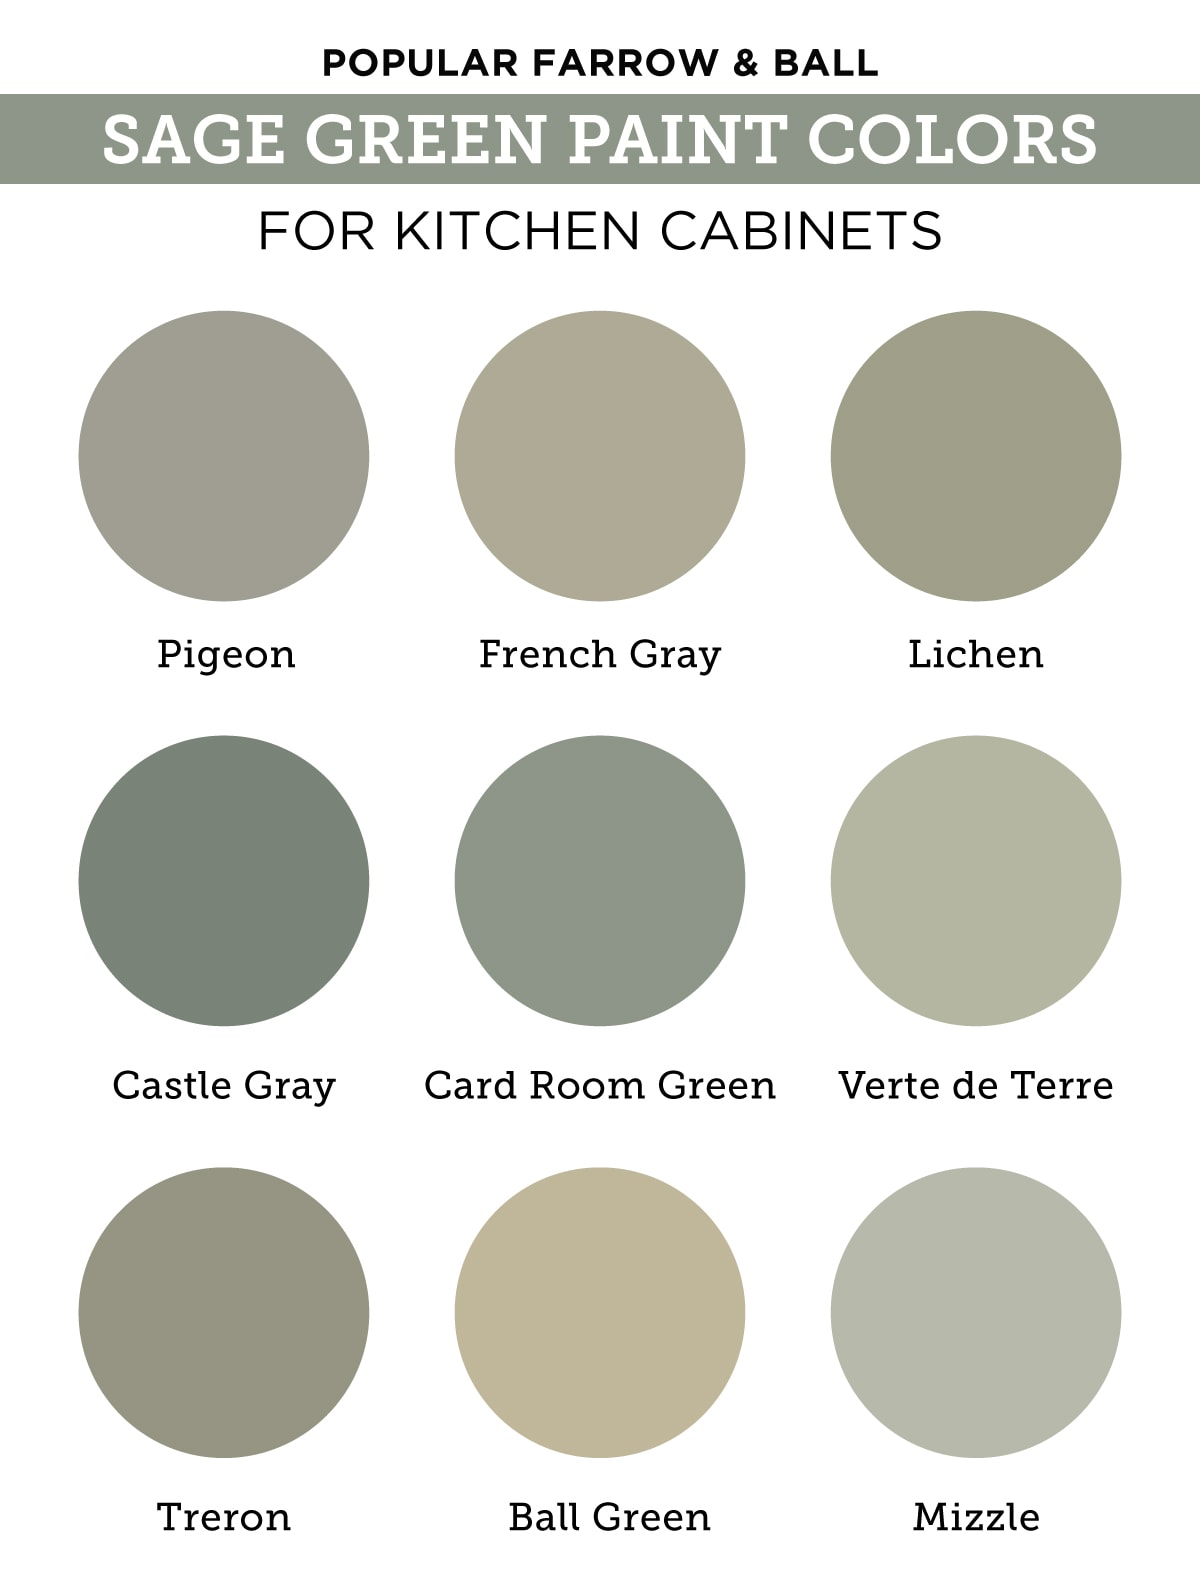 best farrow and ball sage green paint colors for kitchen cabinets